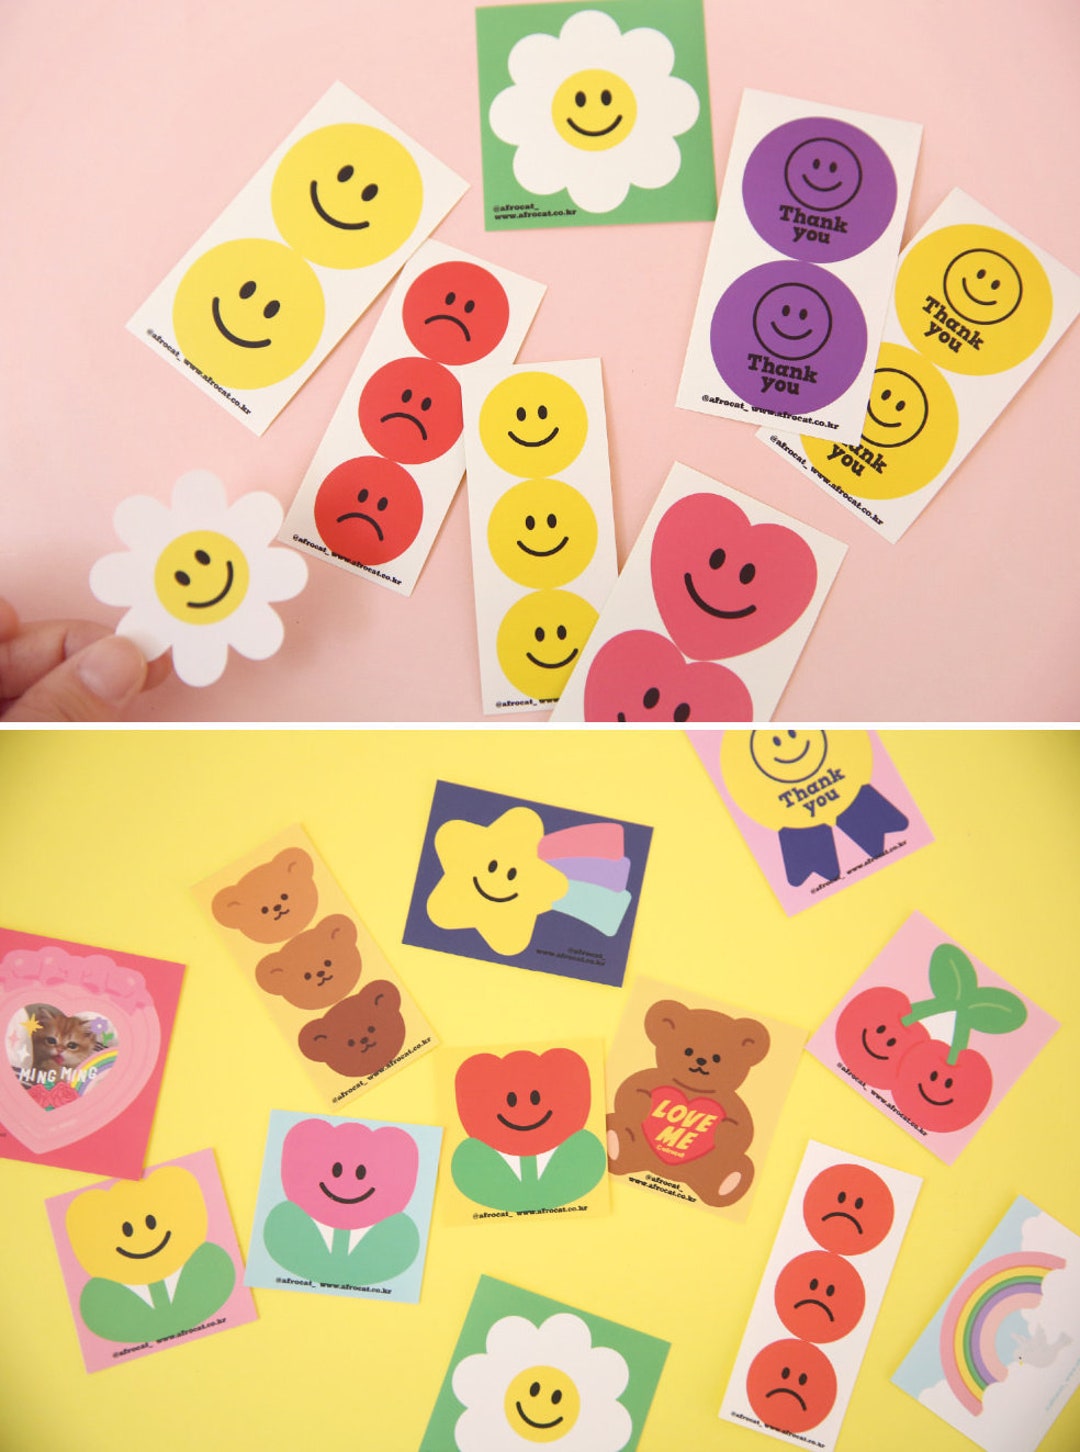 Smile Point Stickers 15types / Planner / Diary Stickers / - Etsy